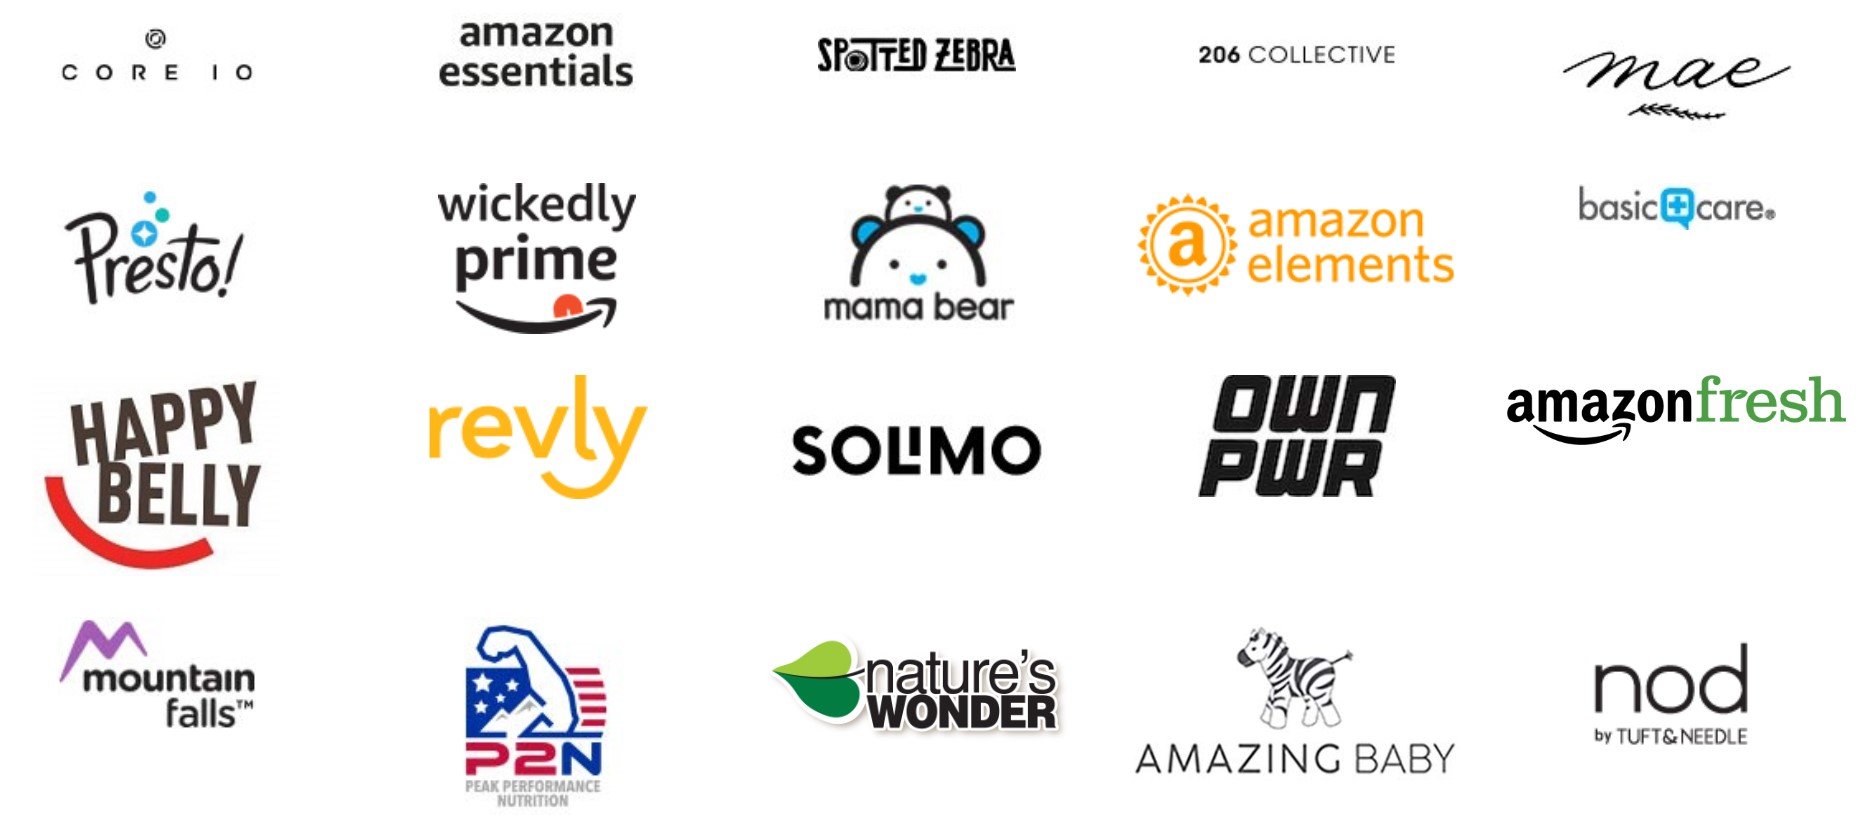 Amazon currently has 146 private label brands, selling over 7,200 products that compete with normal 3P merchant products.